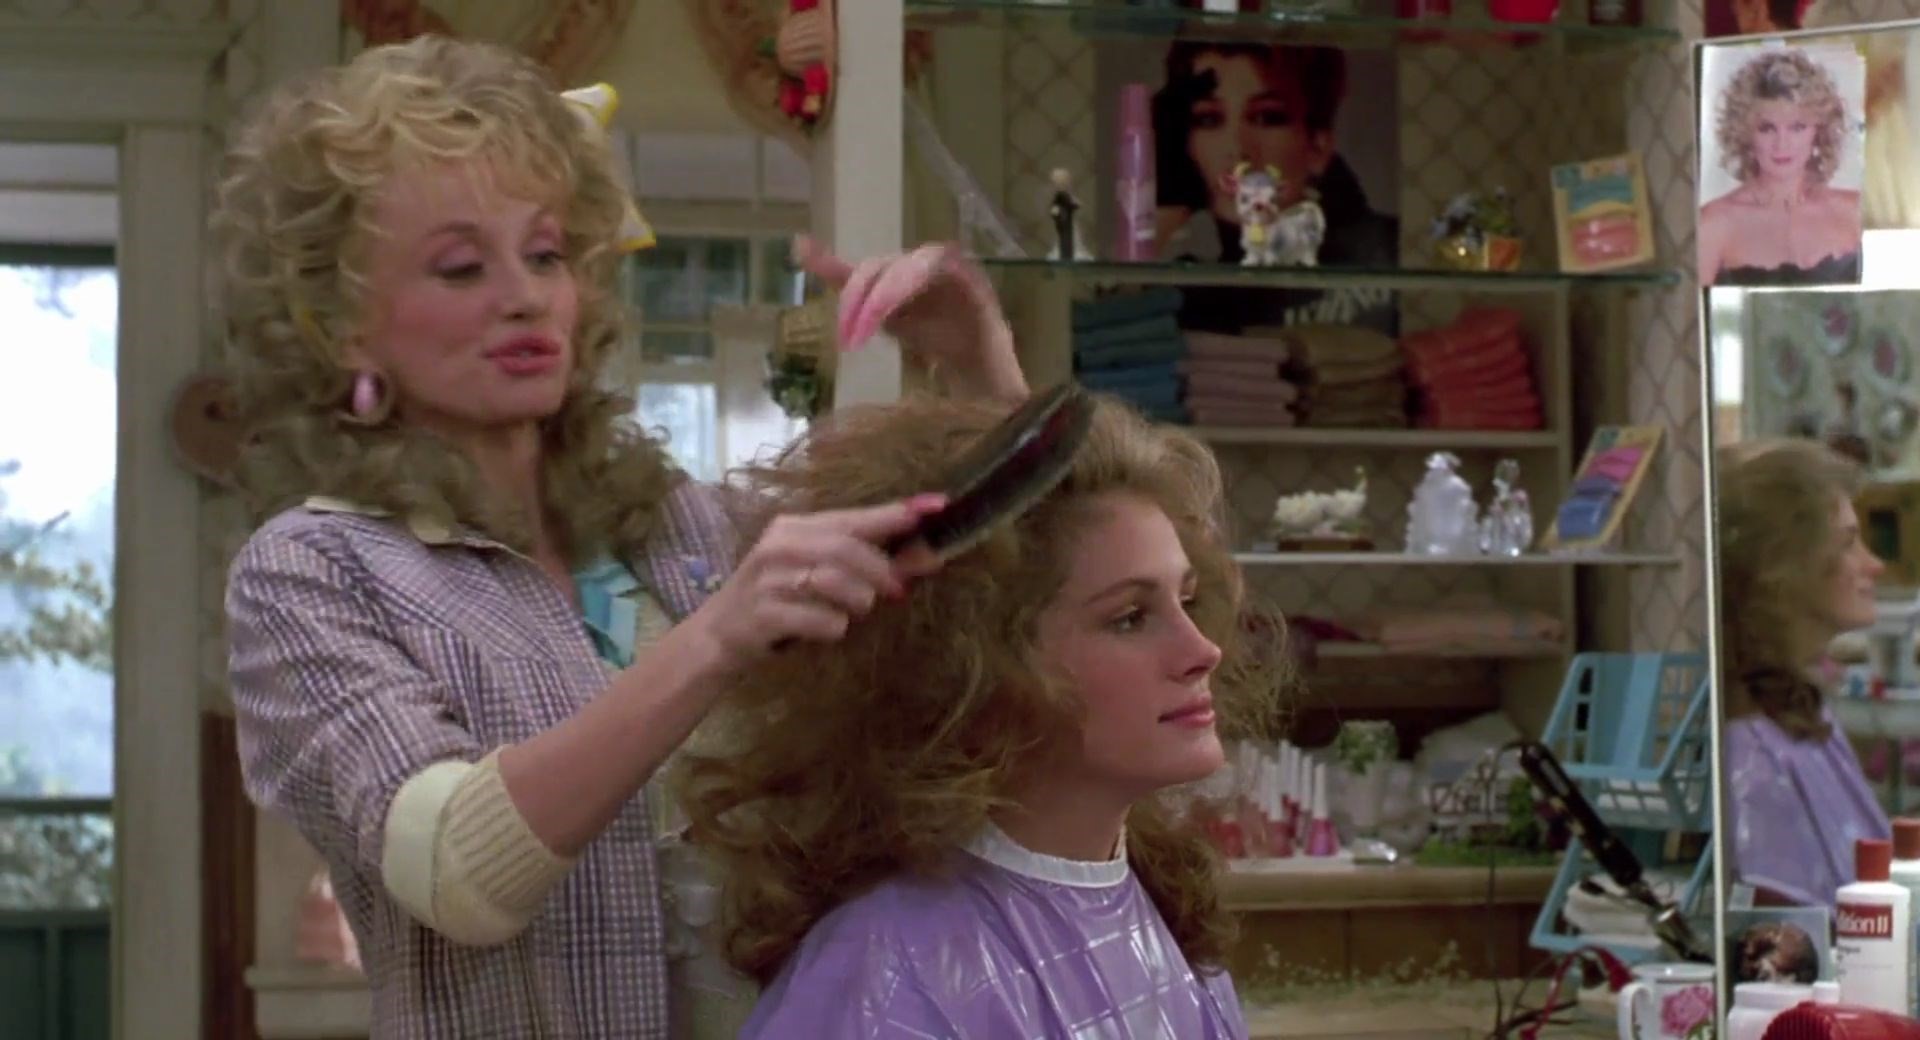 Blowdries and bliss the enduring fantasy of beauty salons in cult film Dazed